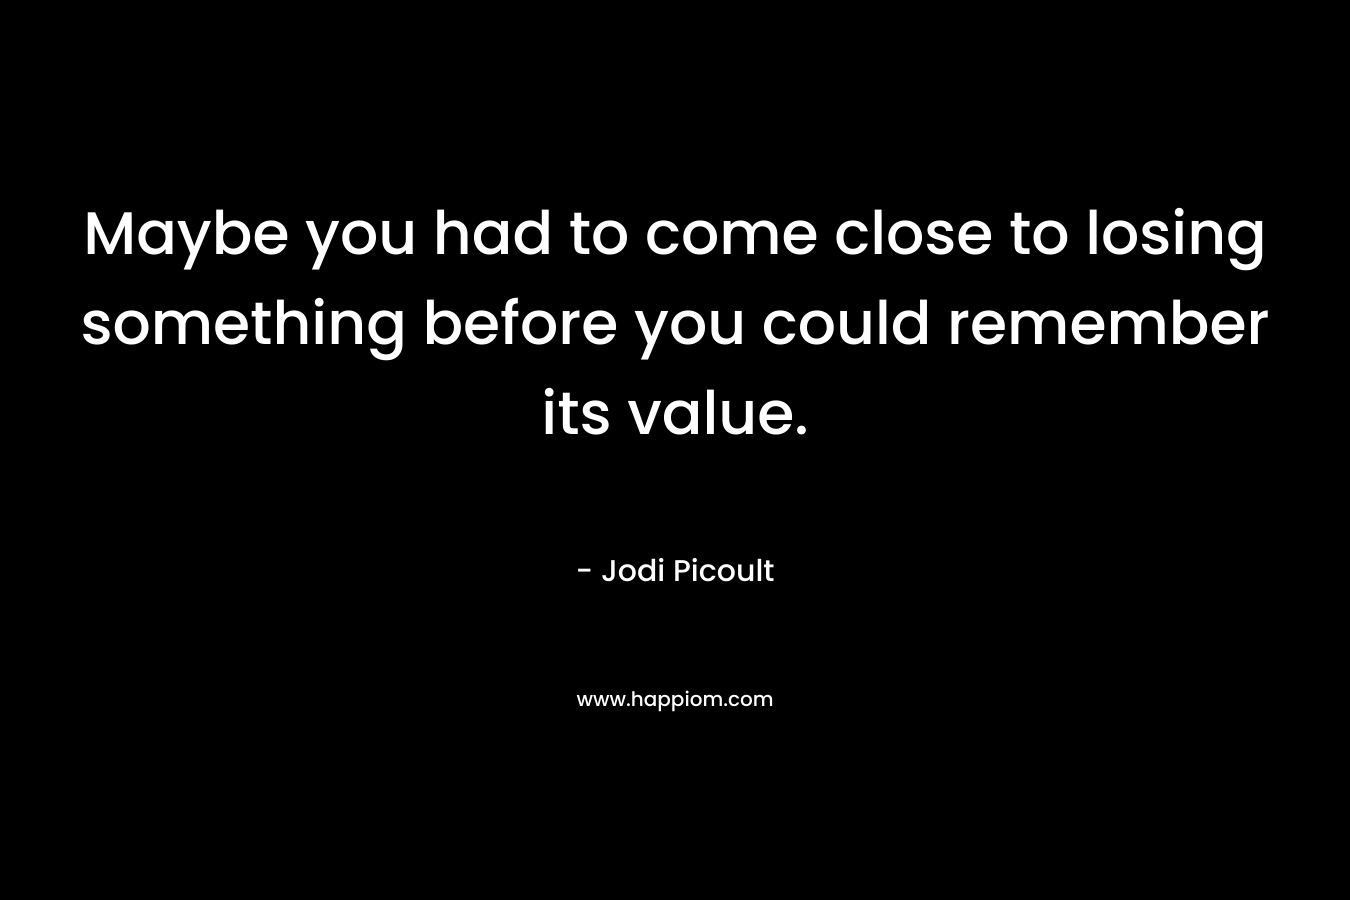 Maybe you had to come close to losing something before you could remember its value.